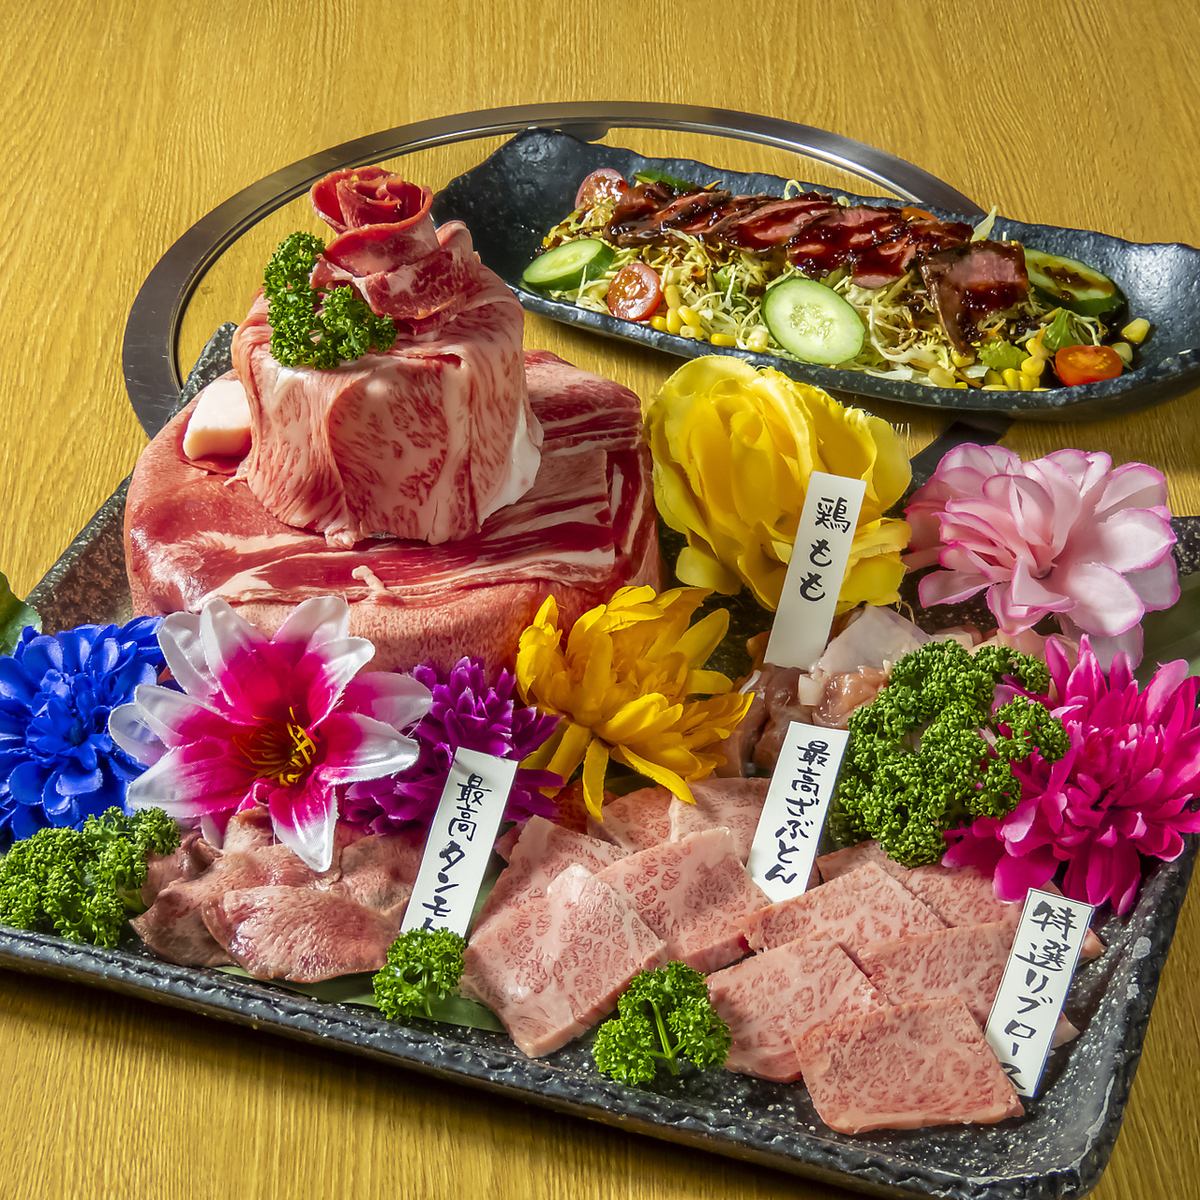 Celebrate your birthday/anniversary at this yakiniku restaurant that boasts a great atmosphere! Free plates are also available!